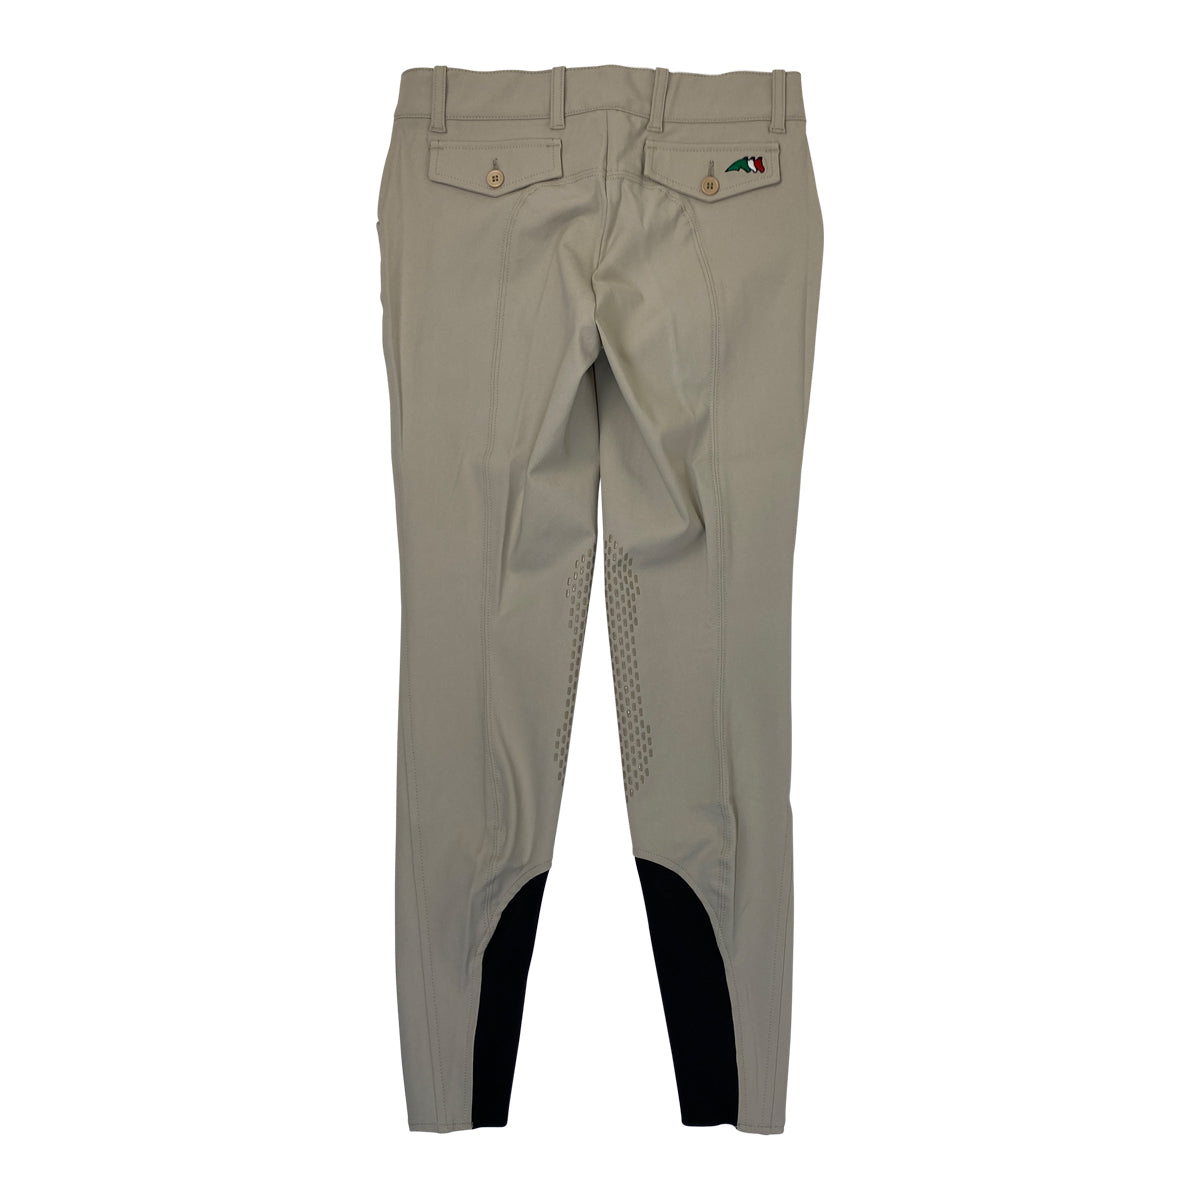 Equiline 'Bice' Knee Patch Breeches in Tan